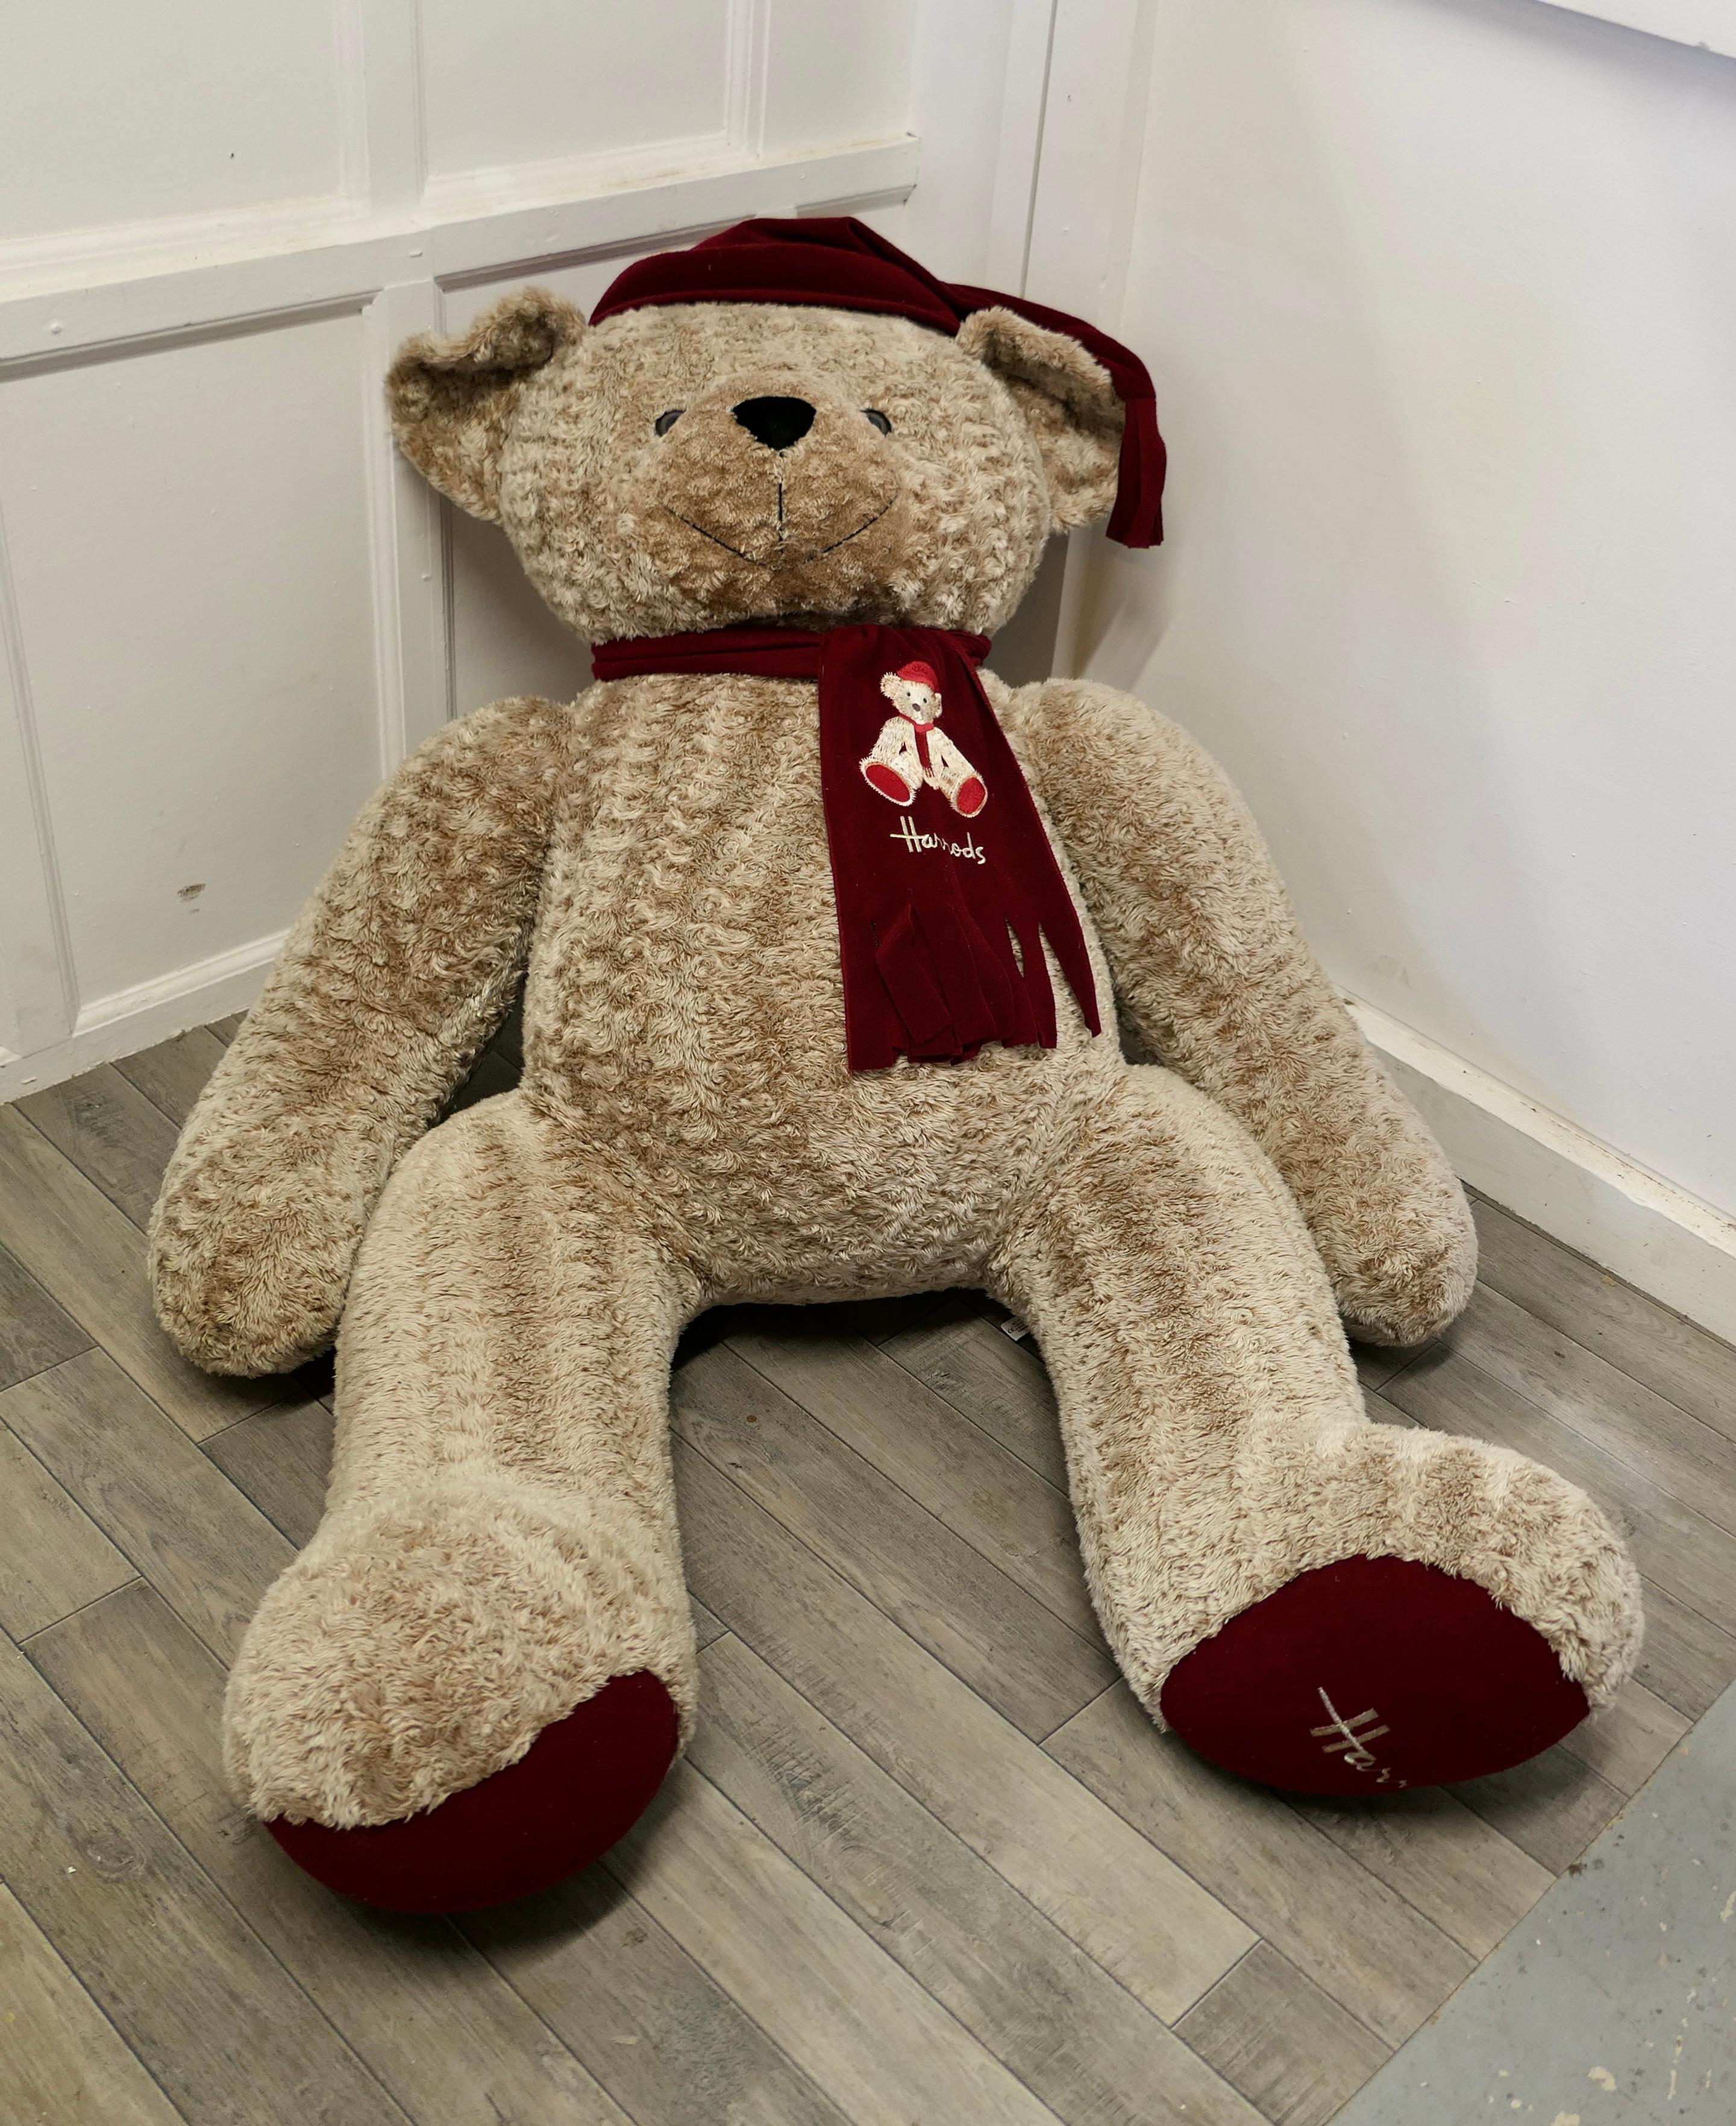  Tall Giant Harrods Shop Display Teddy Bear This Is a Very Rare Piece For Sale 1